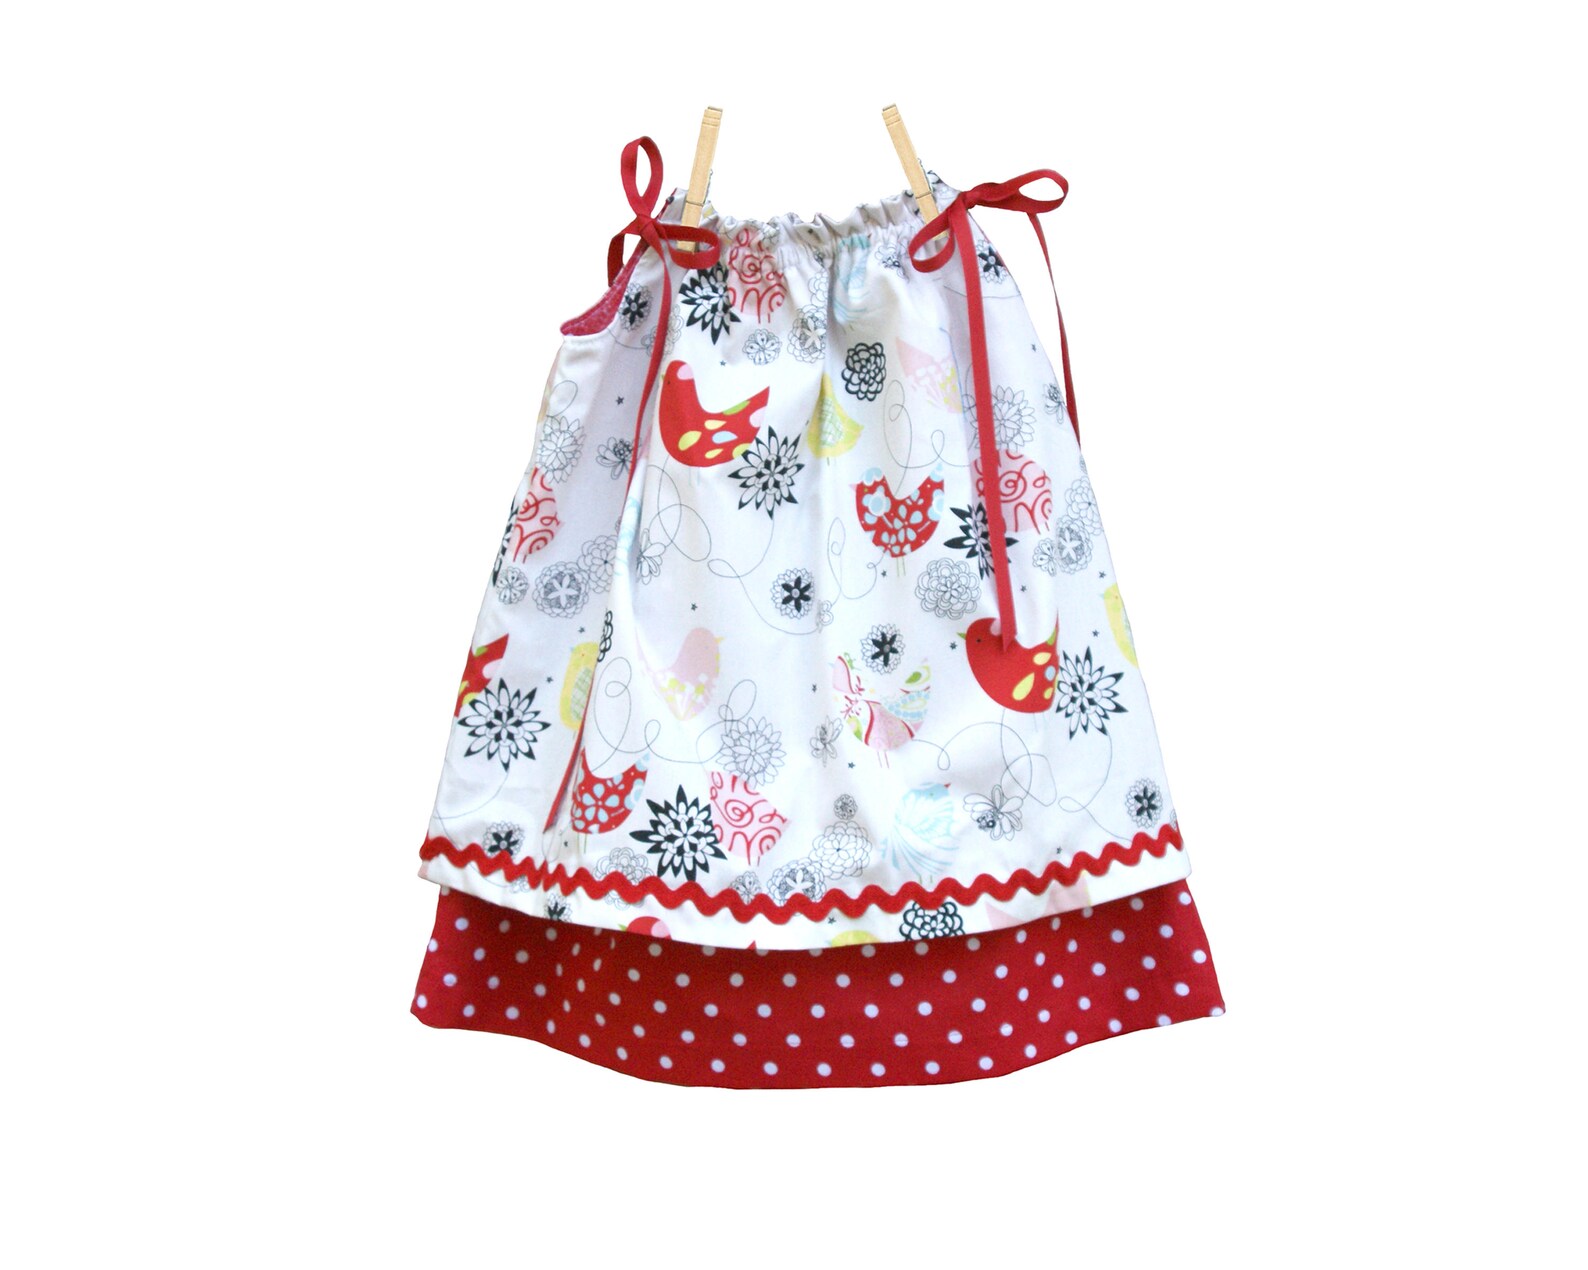 Girl's Quick Easy Pillowcase Dress With Double Layers. PDF - Etsy